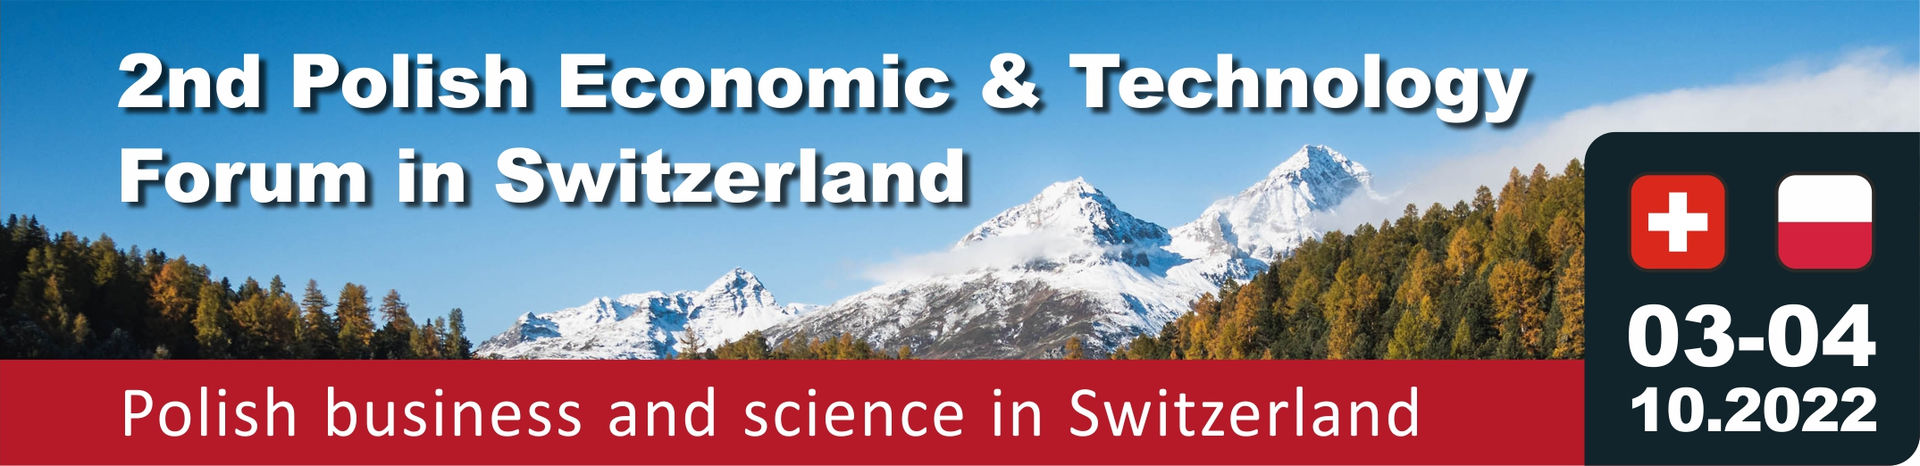 The 2nd Polish Economic & Technology Forum in Switzerland “Polish entrepreneurs in Switzerland - how to succeed?”